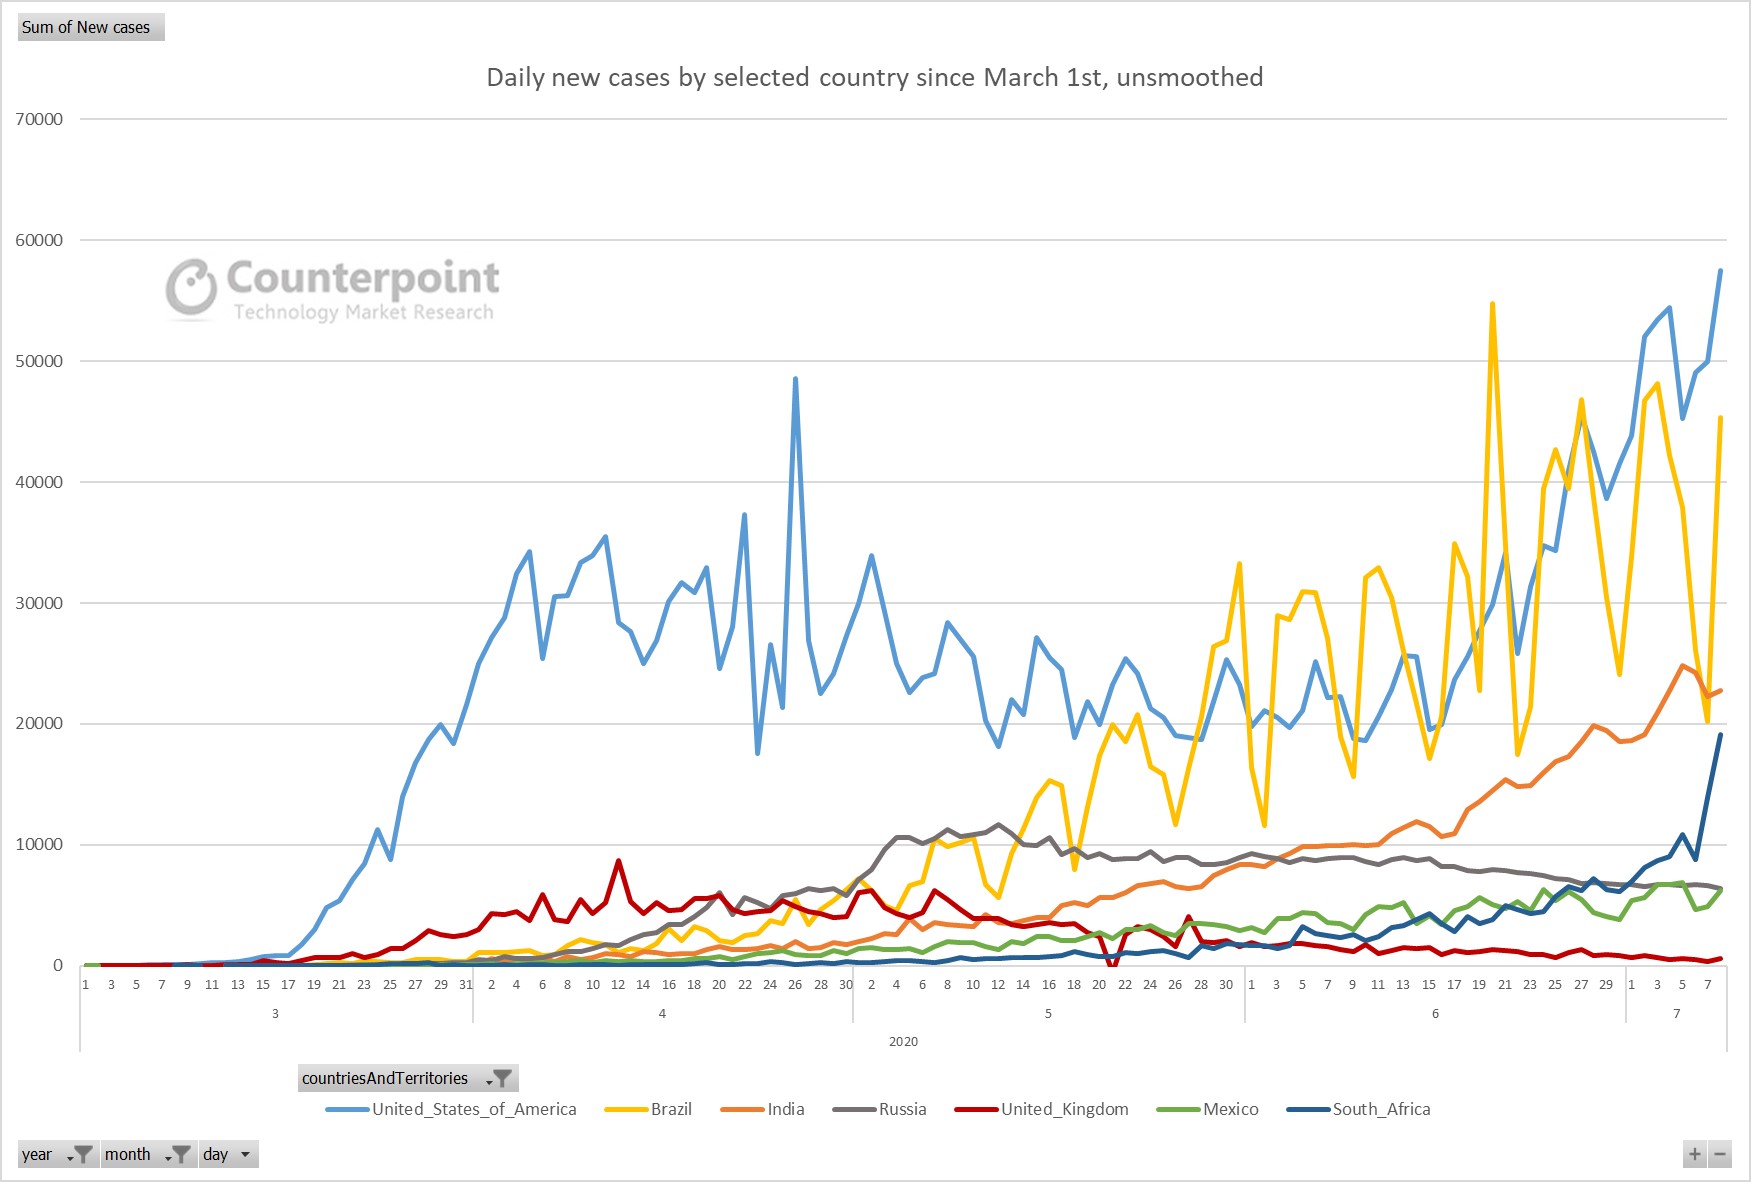 Countepoint daily new cases by selected countries since March 1st, unsmoothened